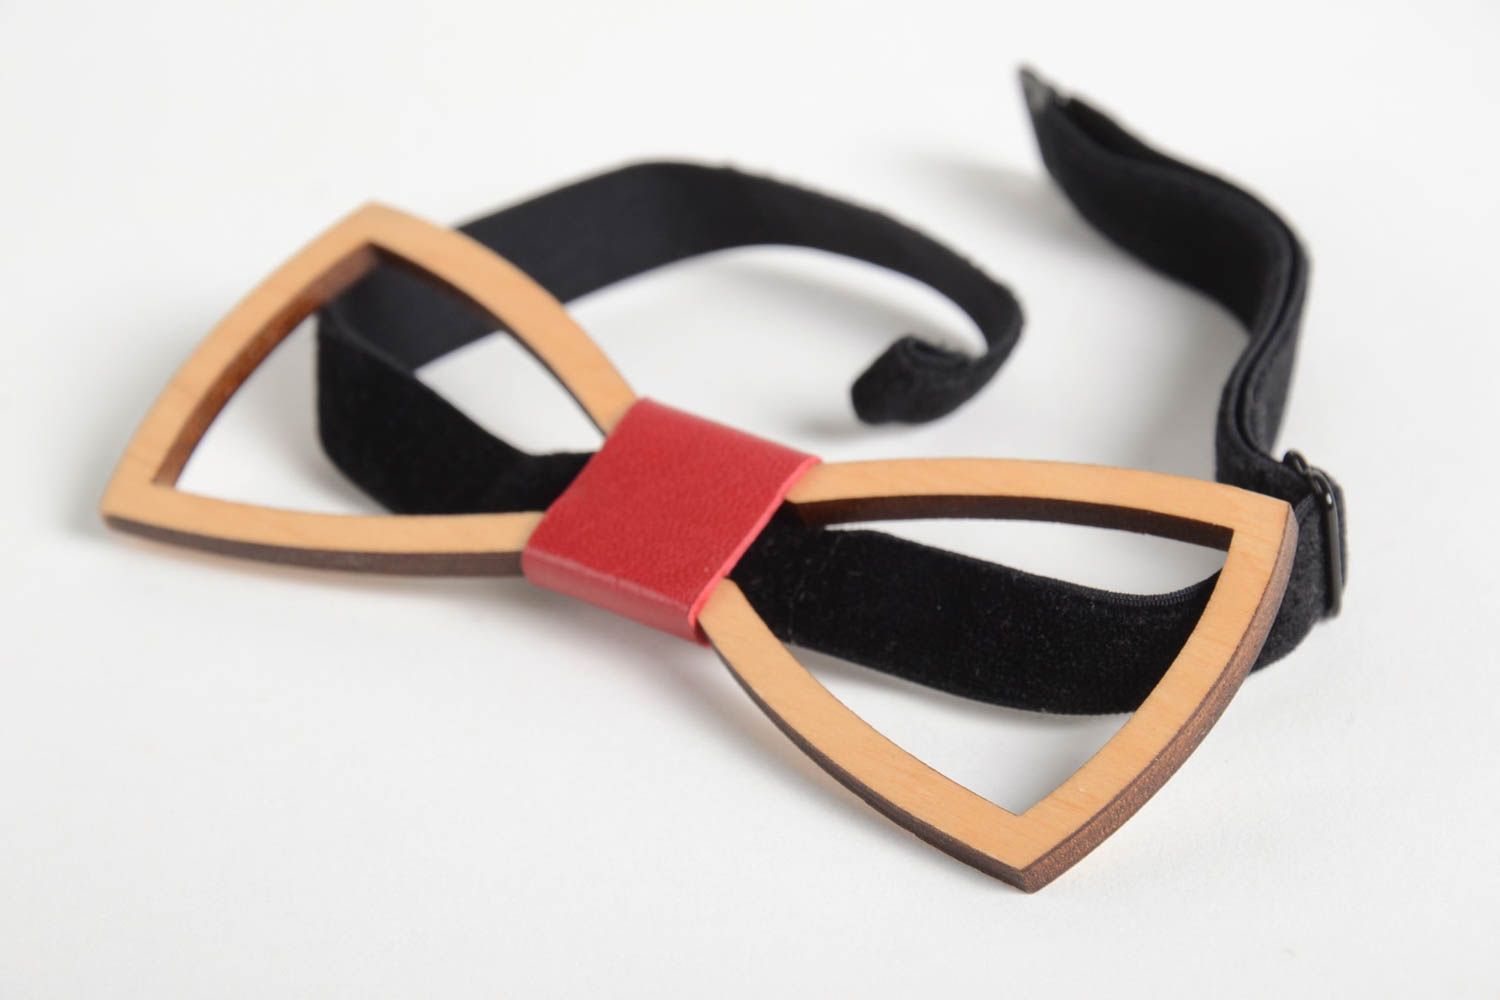 Handmade wooden bow tie stylish elegant bow tie cute accessory for men photo 5